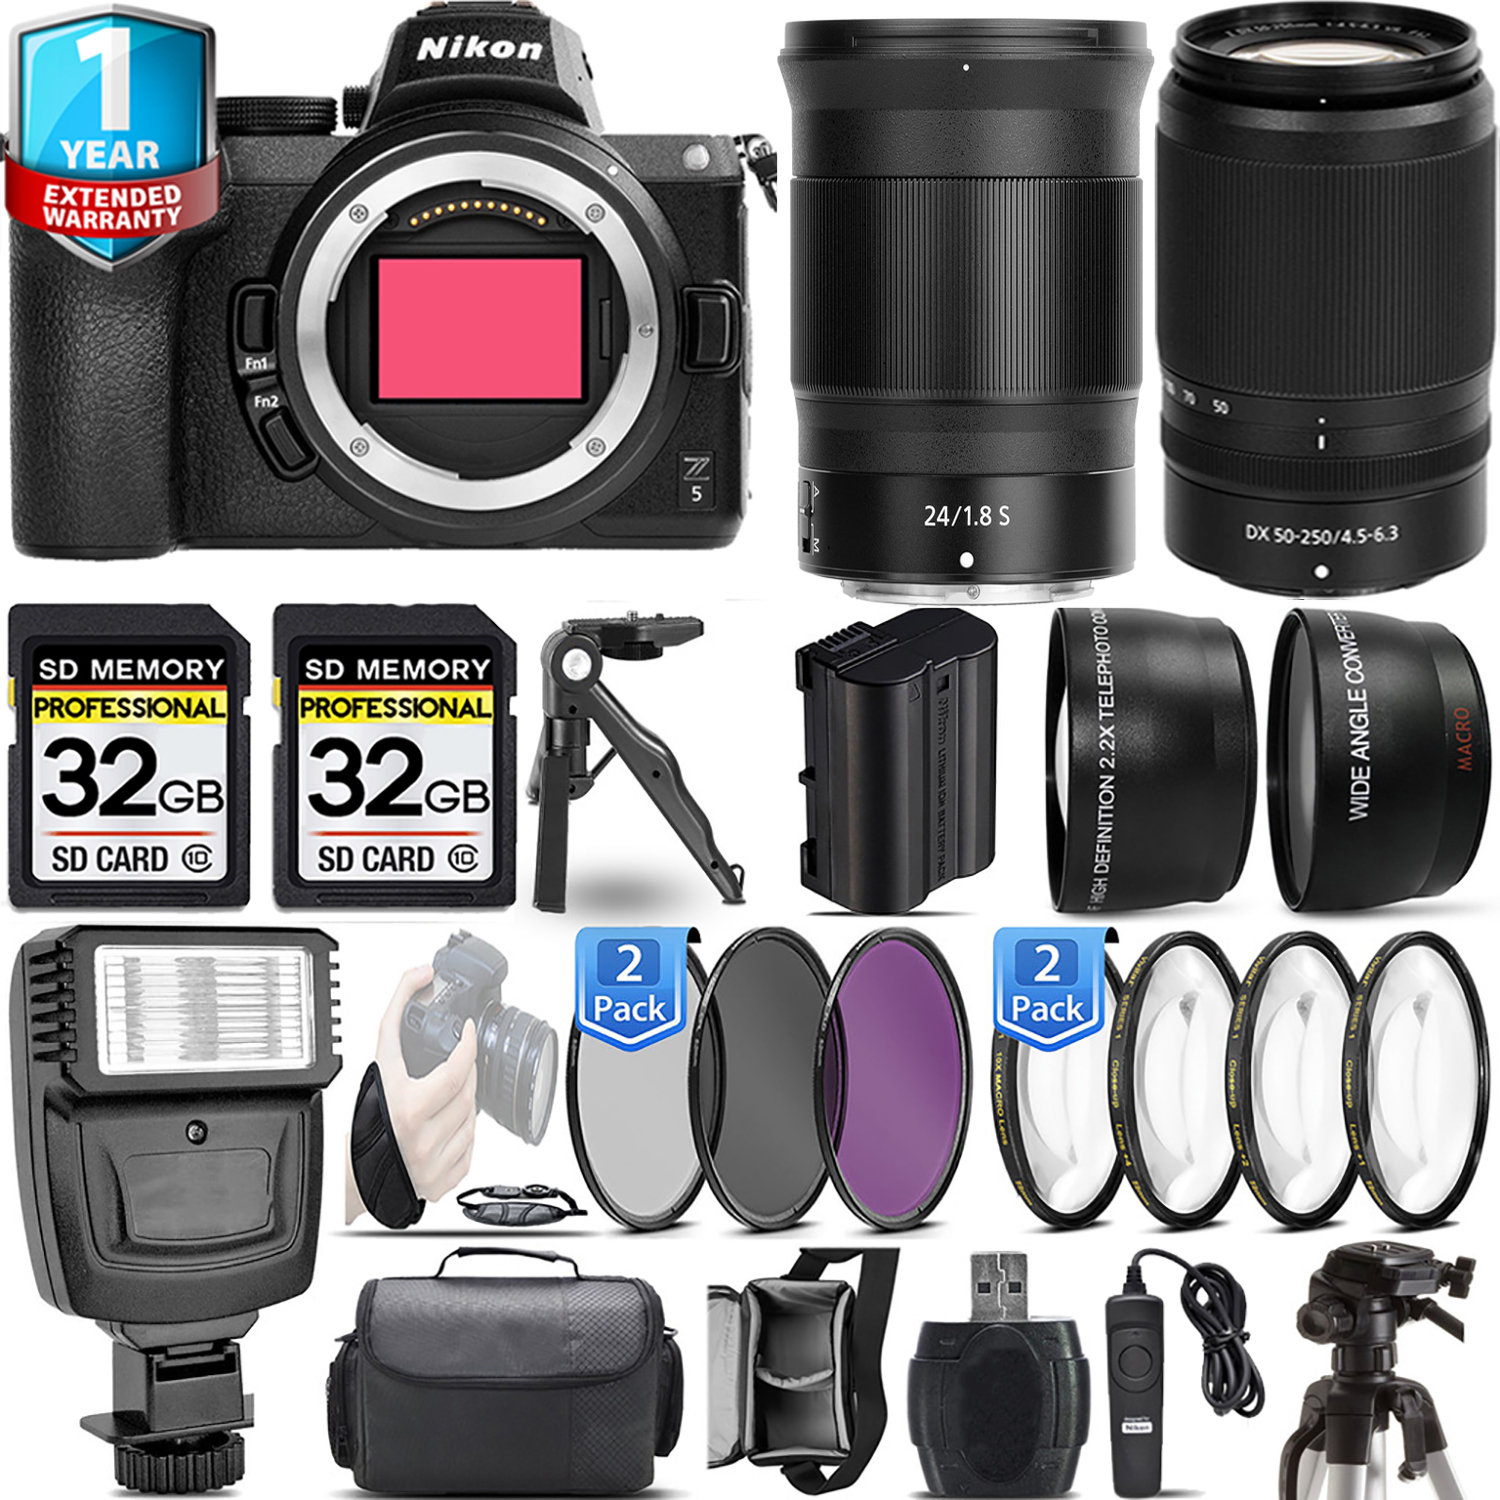 Z5 Camera + 50-250mm + 24mm f/1.8 S Lens + 1 Year Extended Warranty + 64GB Basic Kit *FREE SHIPPING*